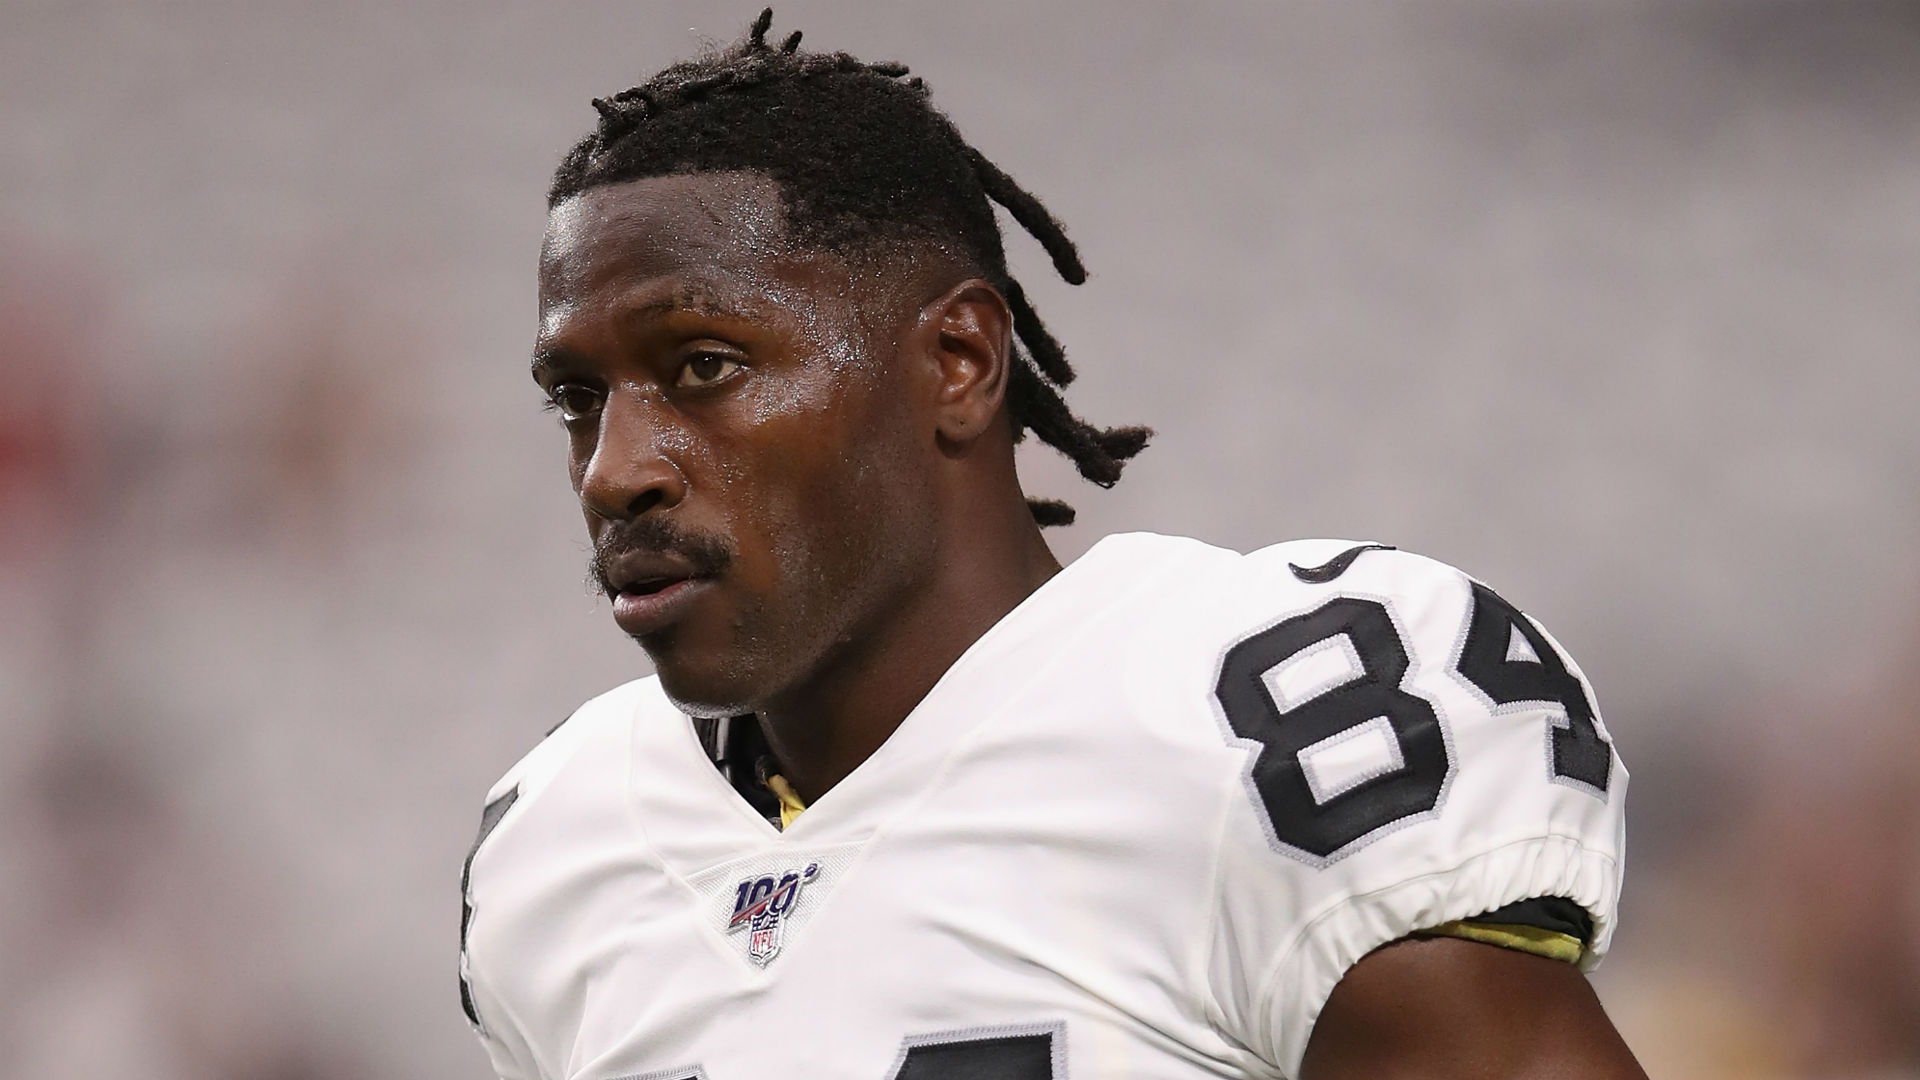 The New England Patriots' Antonio Brown denied sexual assault and rape allegations made against him by his former trainer.